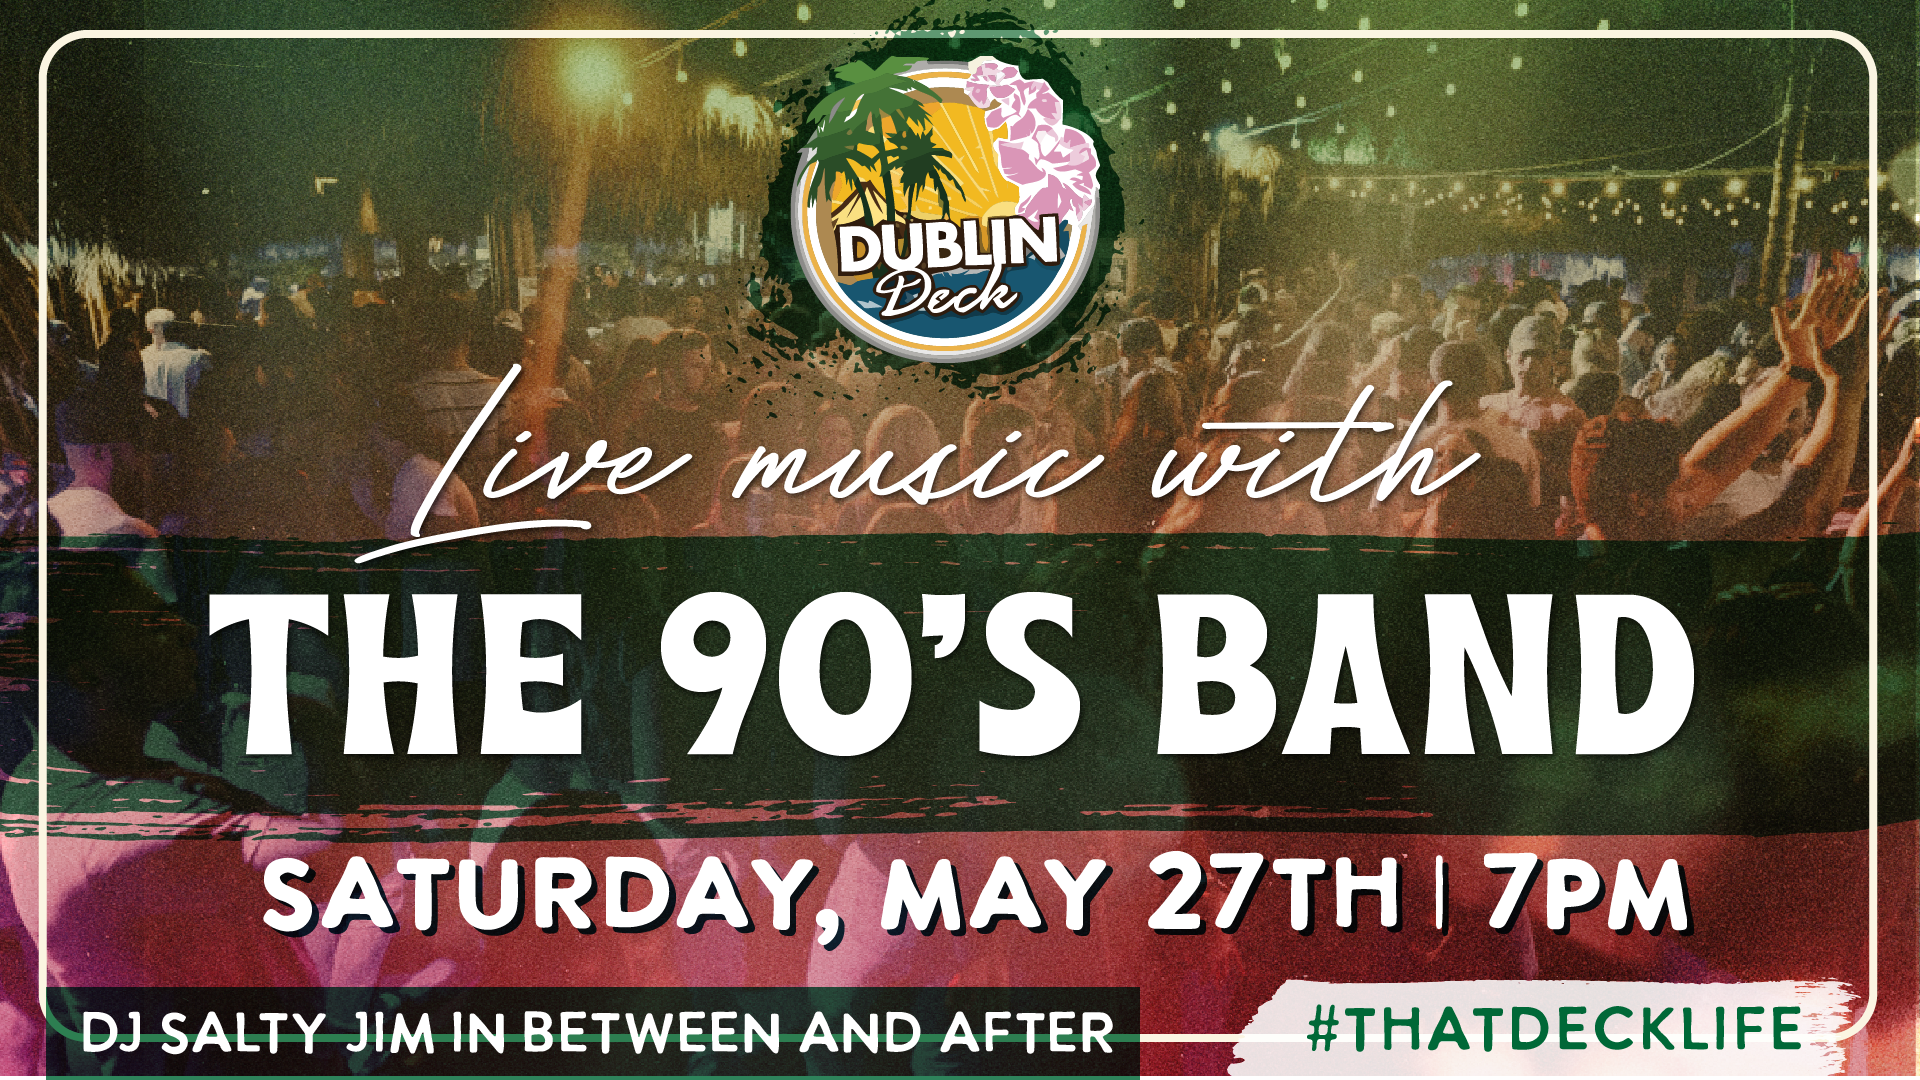 Spend your Saturday night with The 90's band! Music begins at 7PM